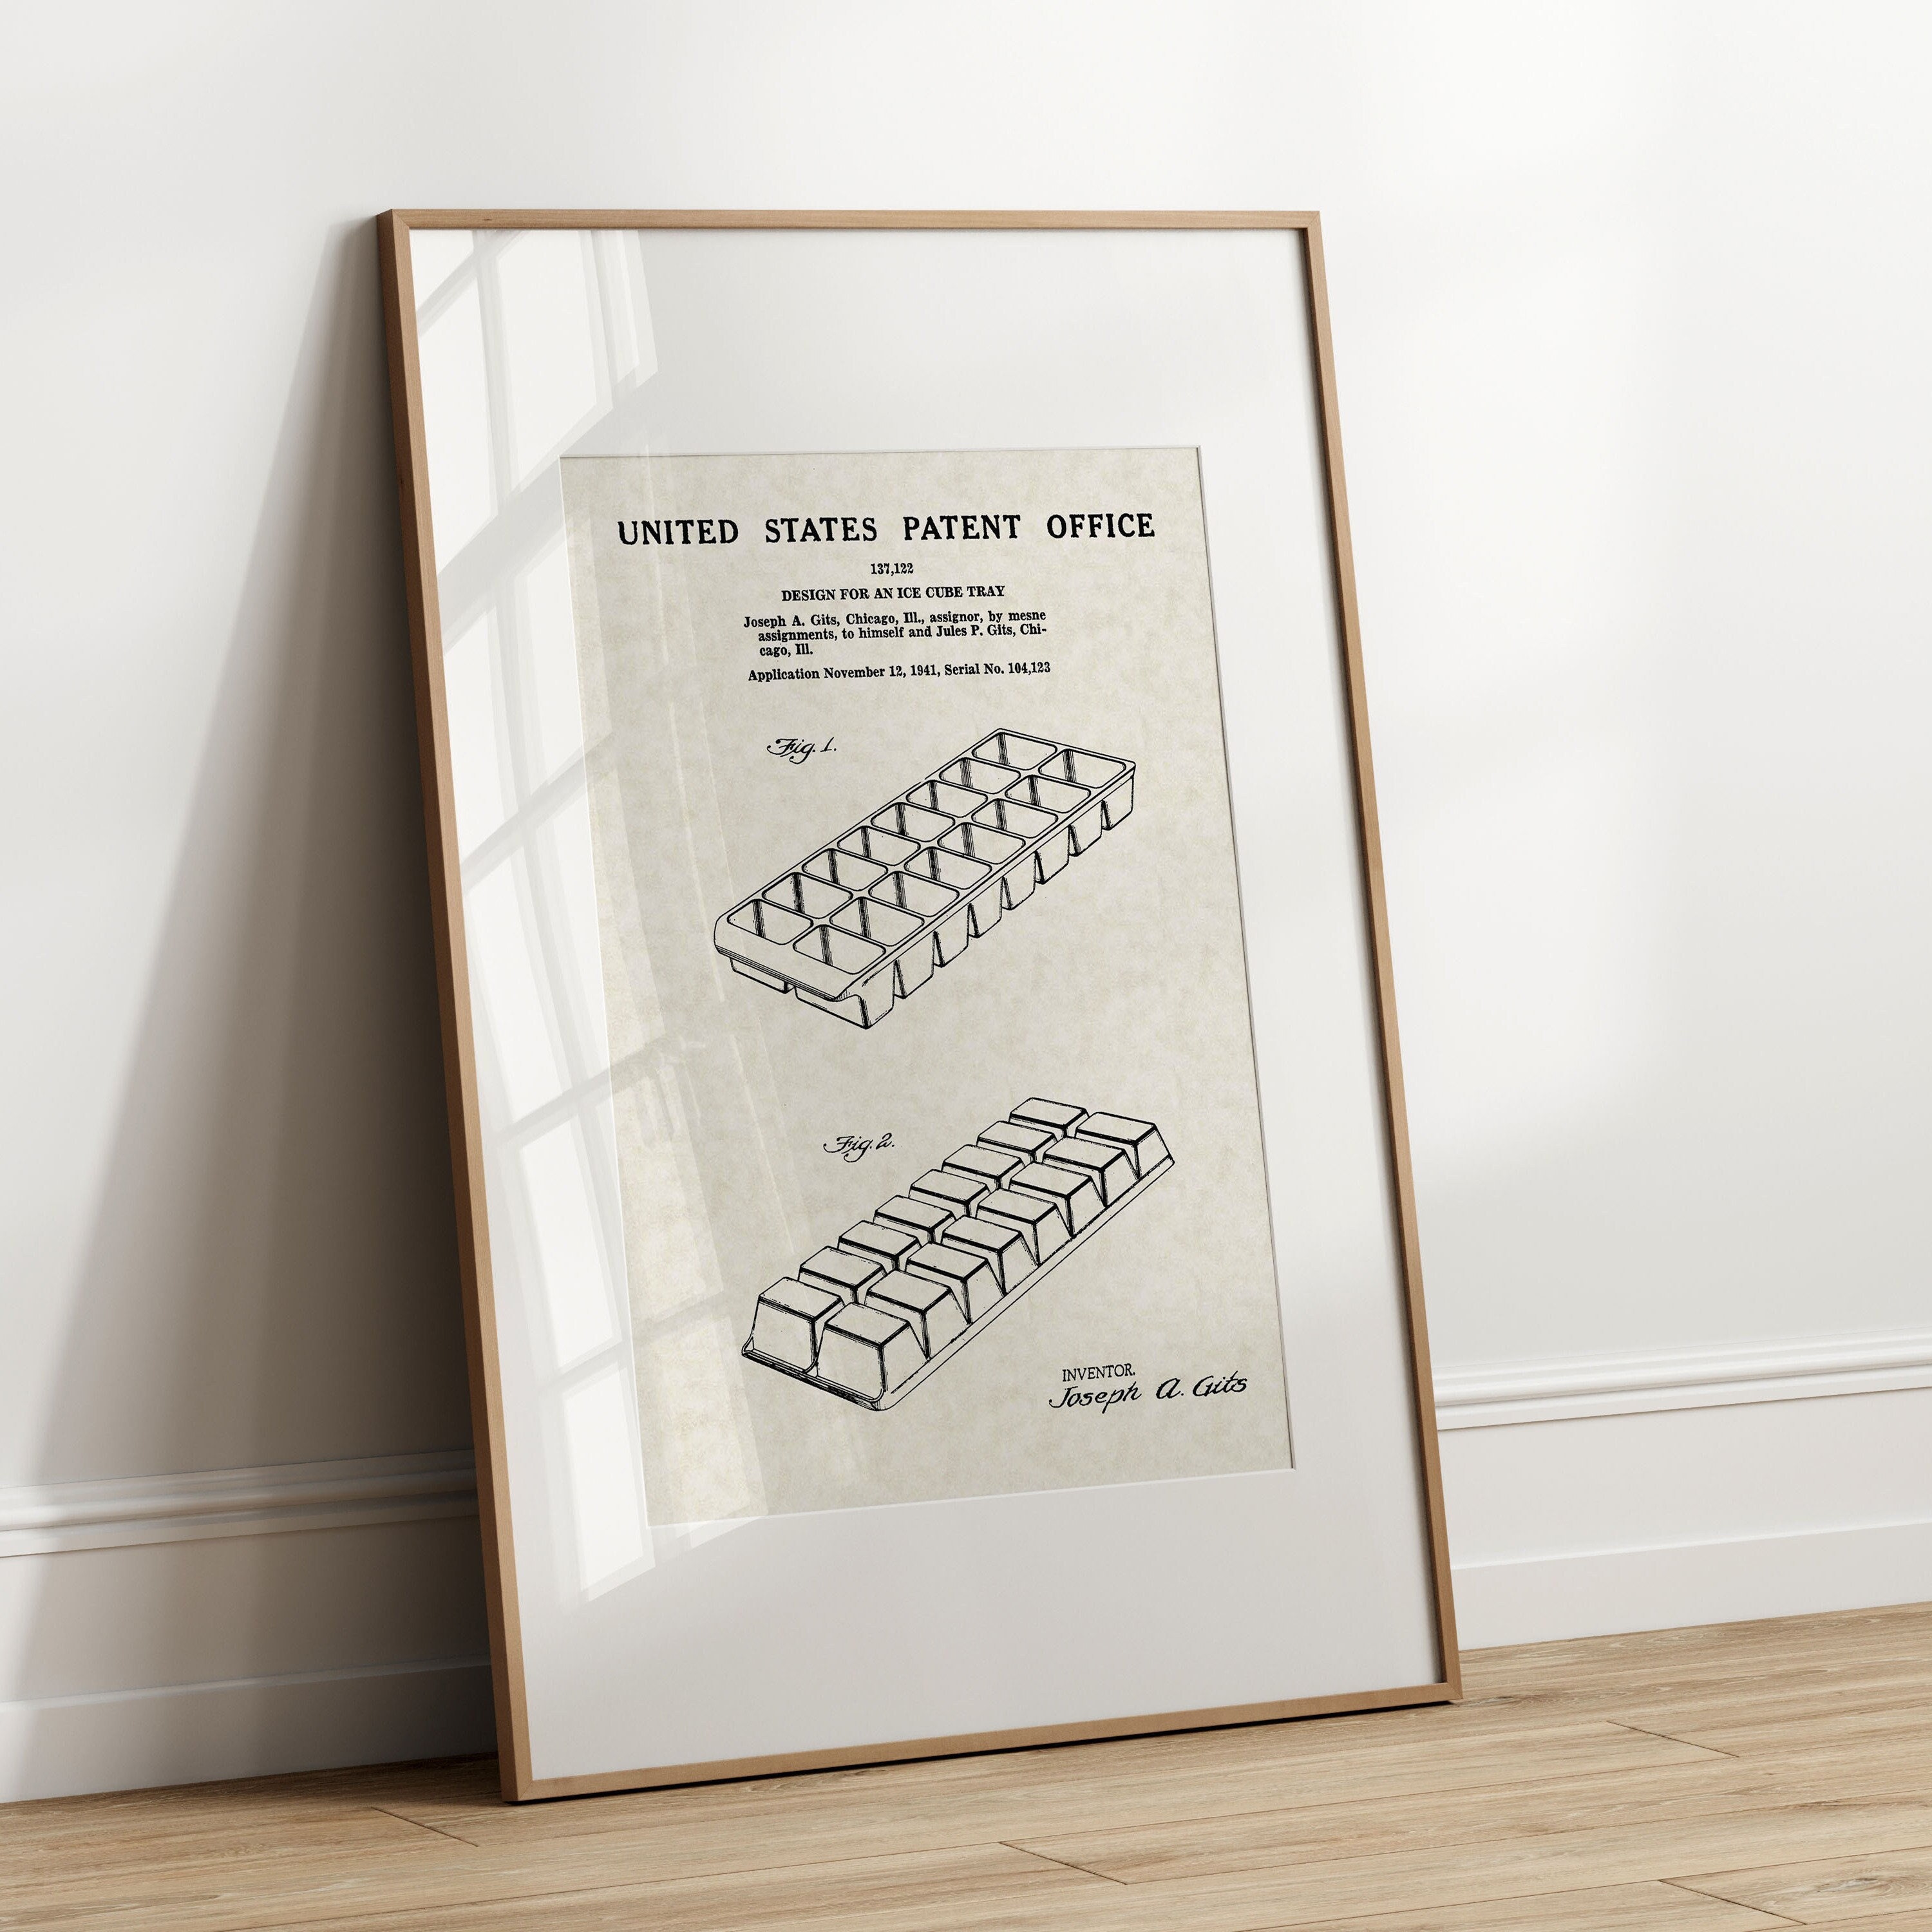 Ice Cube Tray 1944 free Shipping Large Unframed 8.5x11 Patent Print 